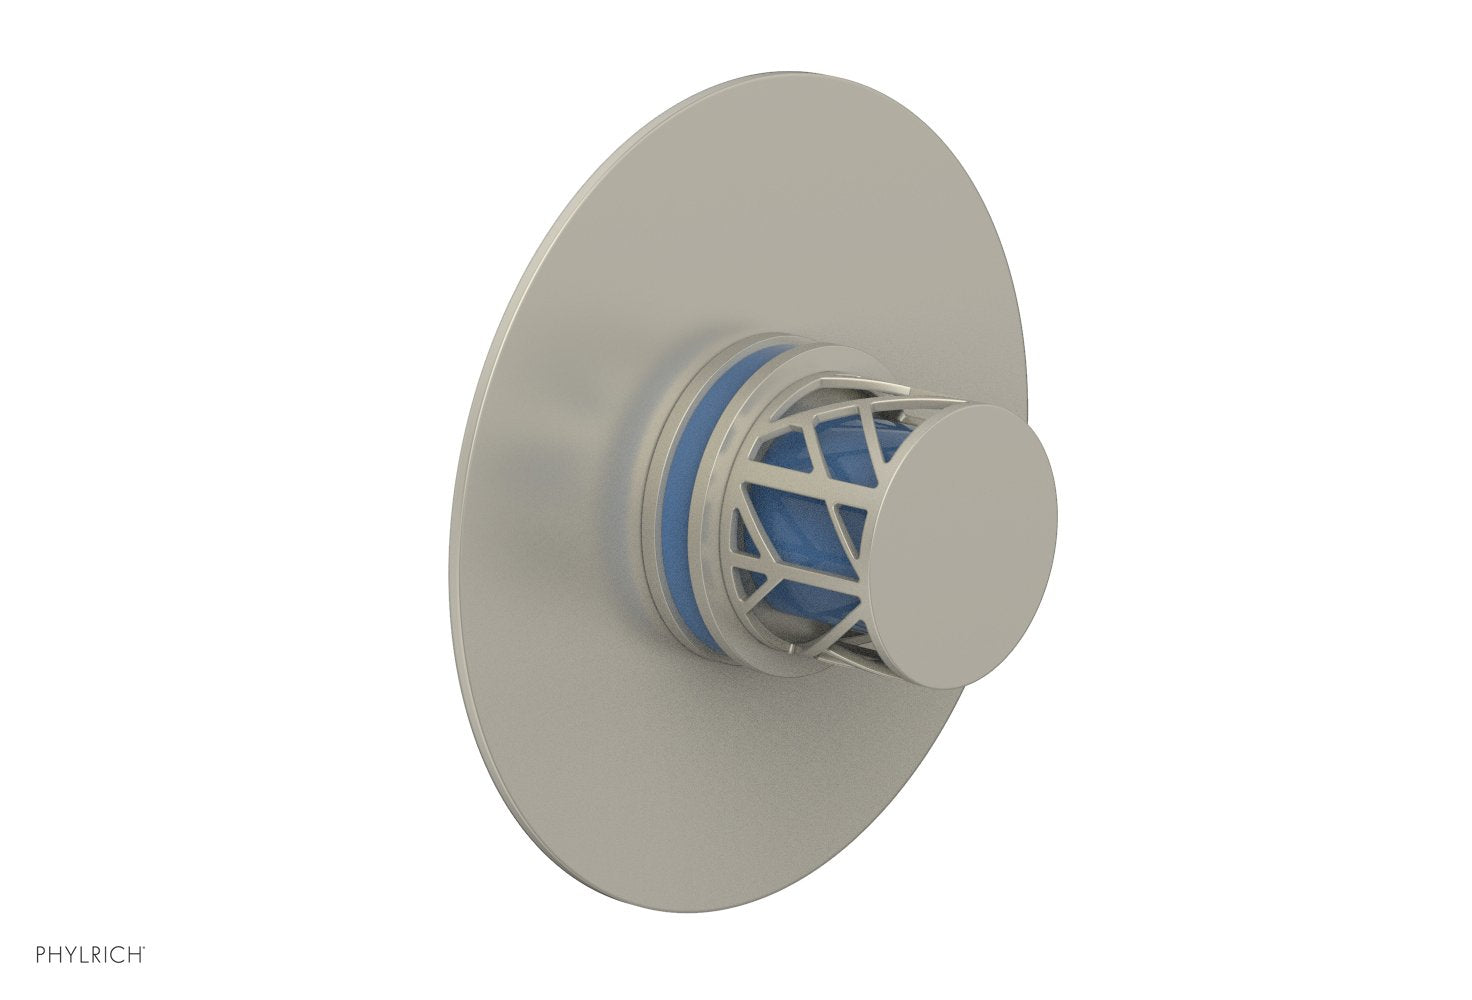 Phylrich JOLIE Pressure Balance Shower Plate & Handle Trim, Round Handle with "Light Blue" Accents